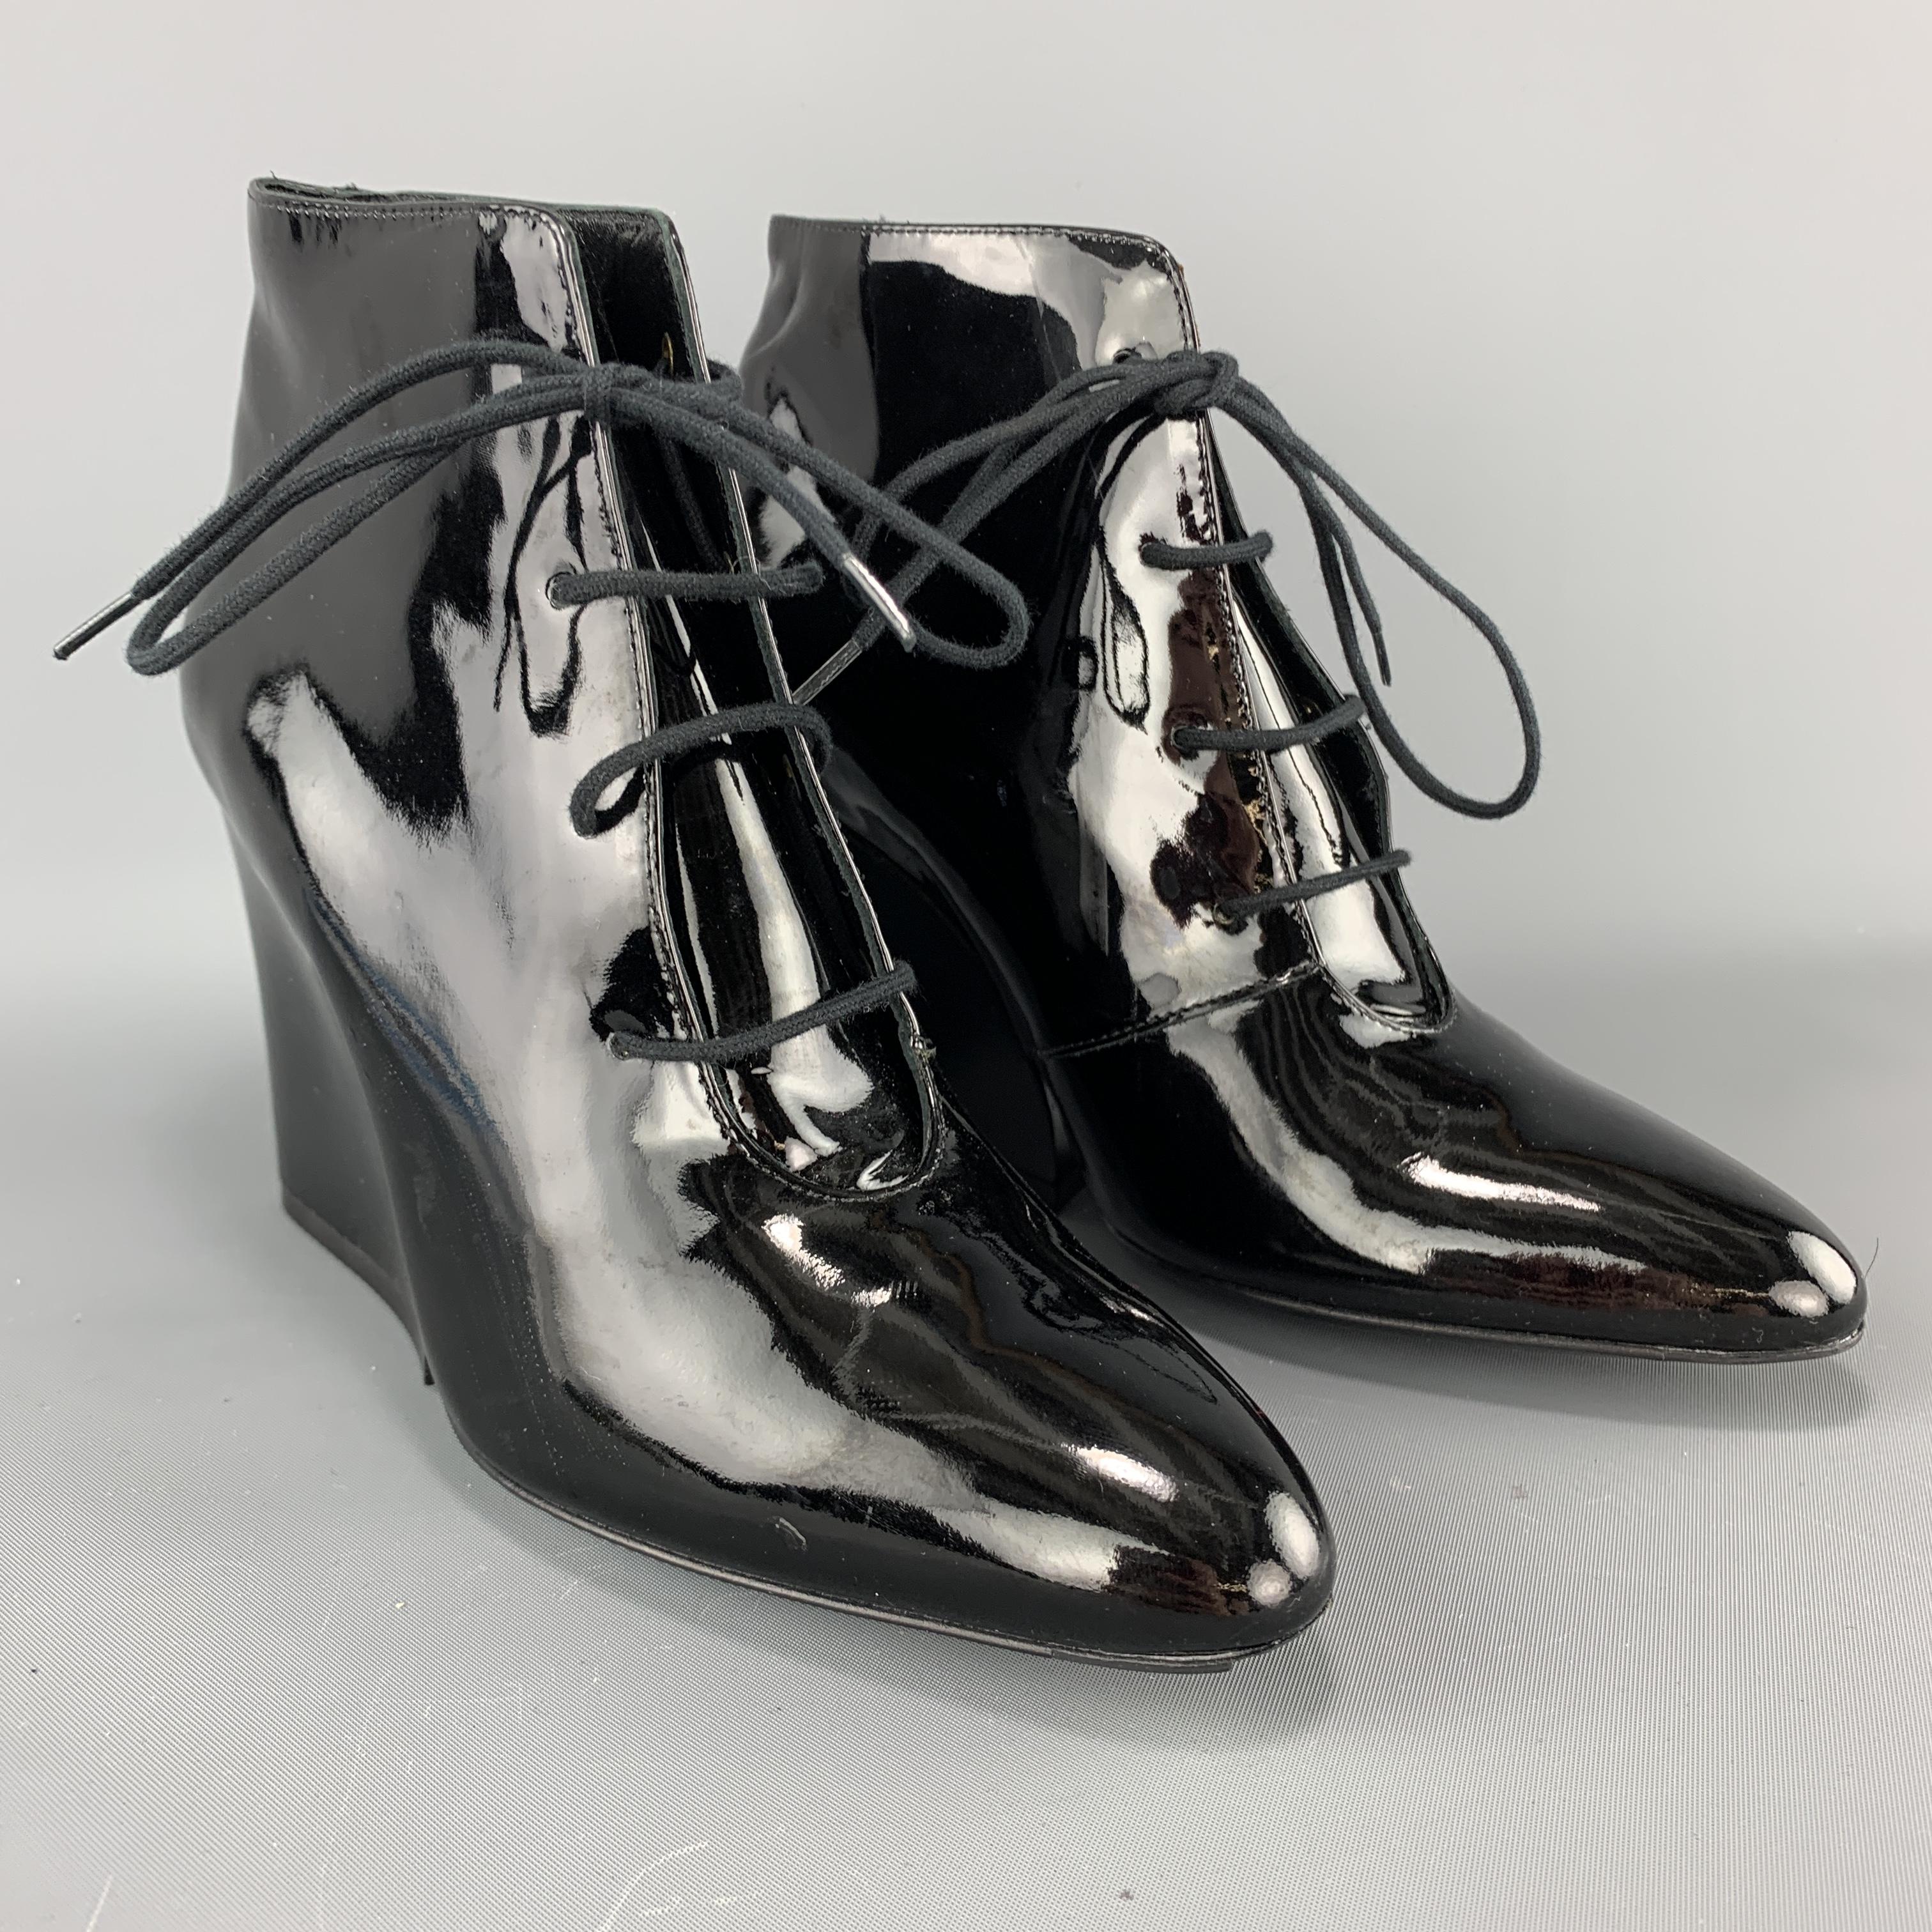 ROBERT CLERGERIE ankle booties come in black patent leather with a pointed toe, lace up front, and chunky stacked heel. Never work but imperfection on sole. Made in France.

Brand New. 
Marked: 6

Heel: 3.5 in.
